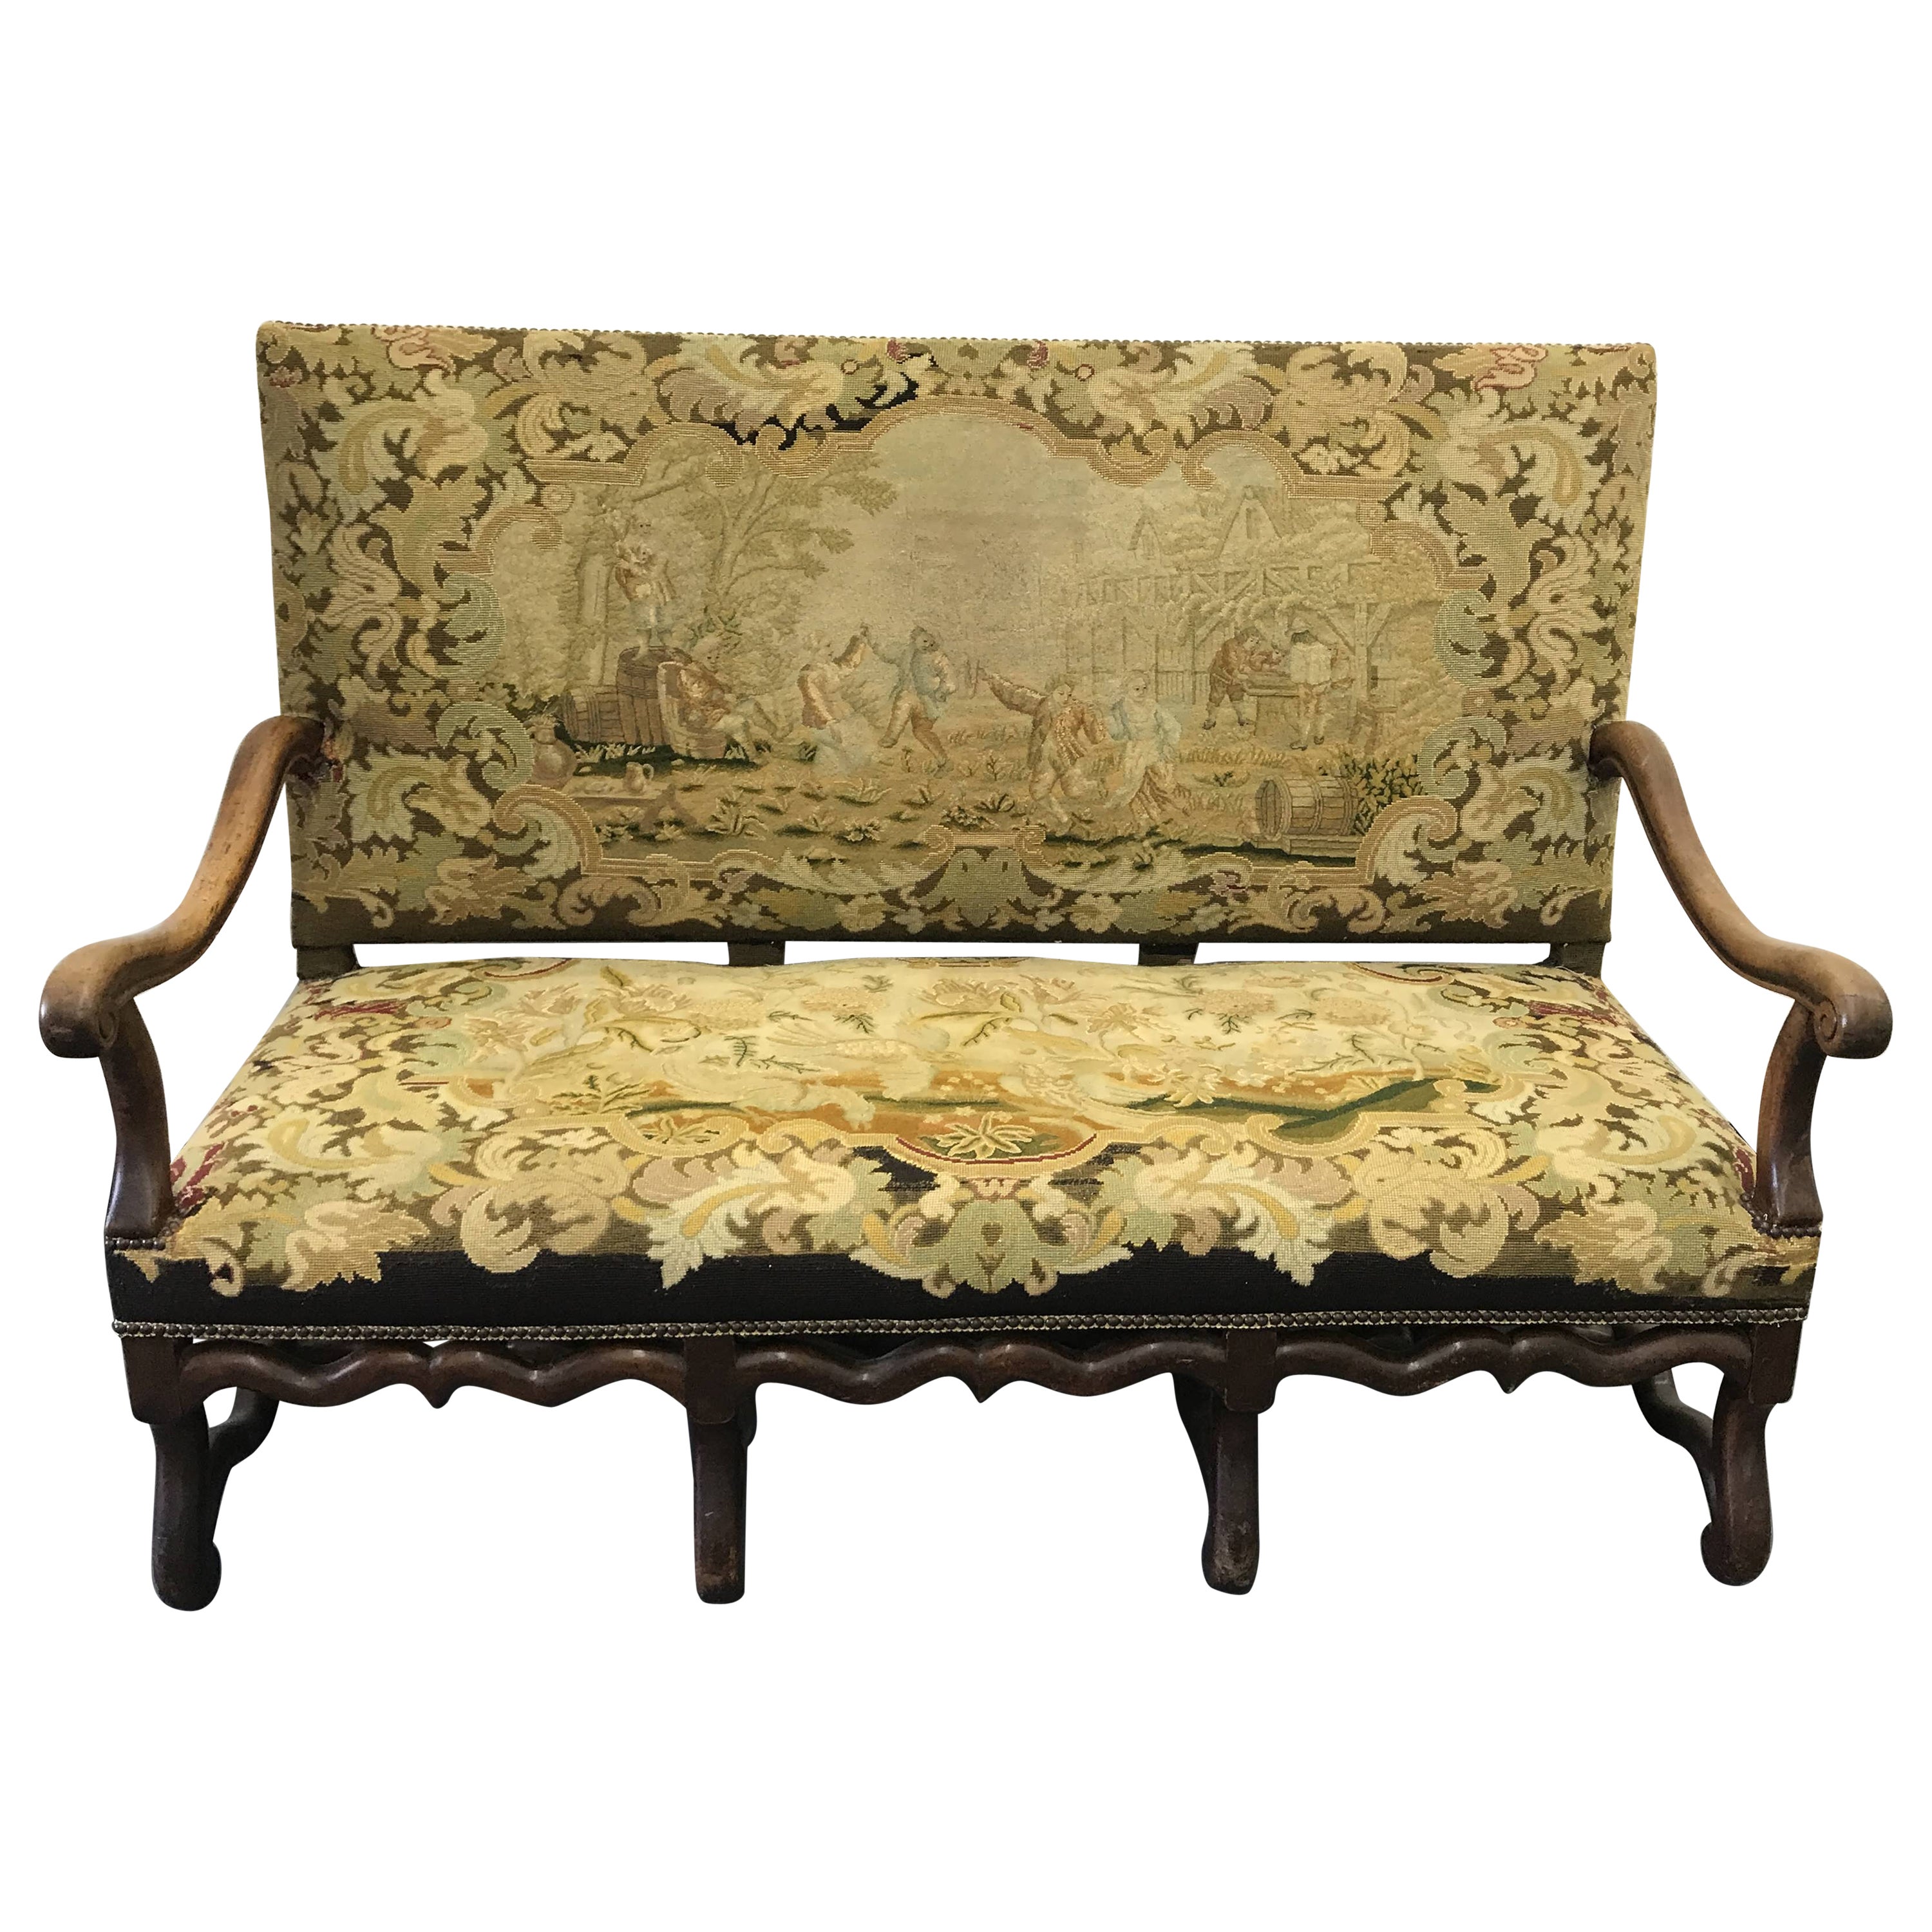 Antique 19th Century French Needlepoint and Petit Point Sofa Loveseat For Sale